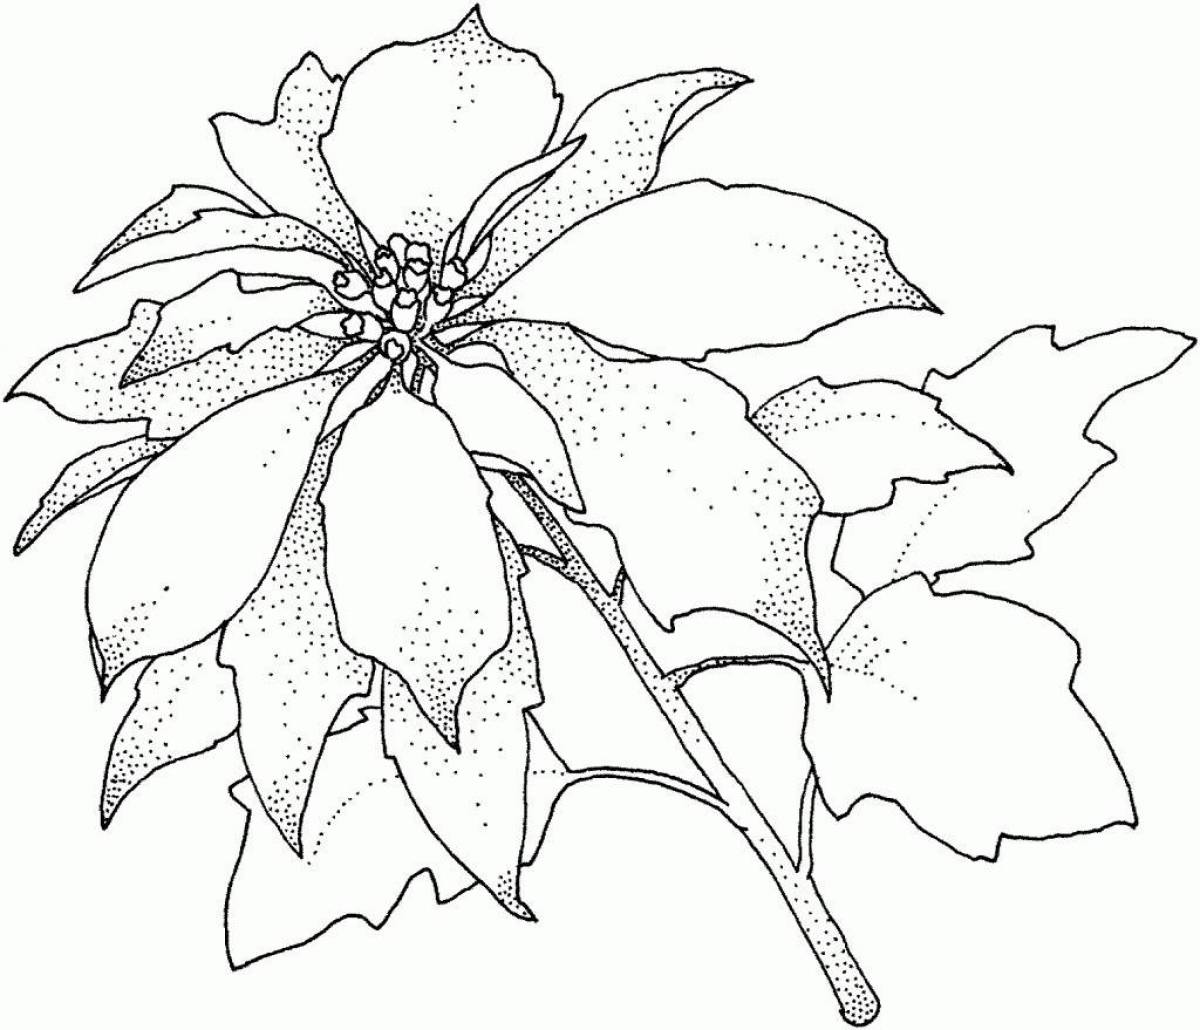 Glowing indoor plants coloring page